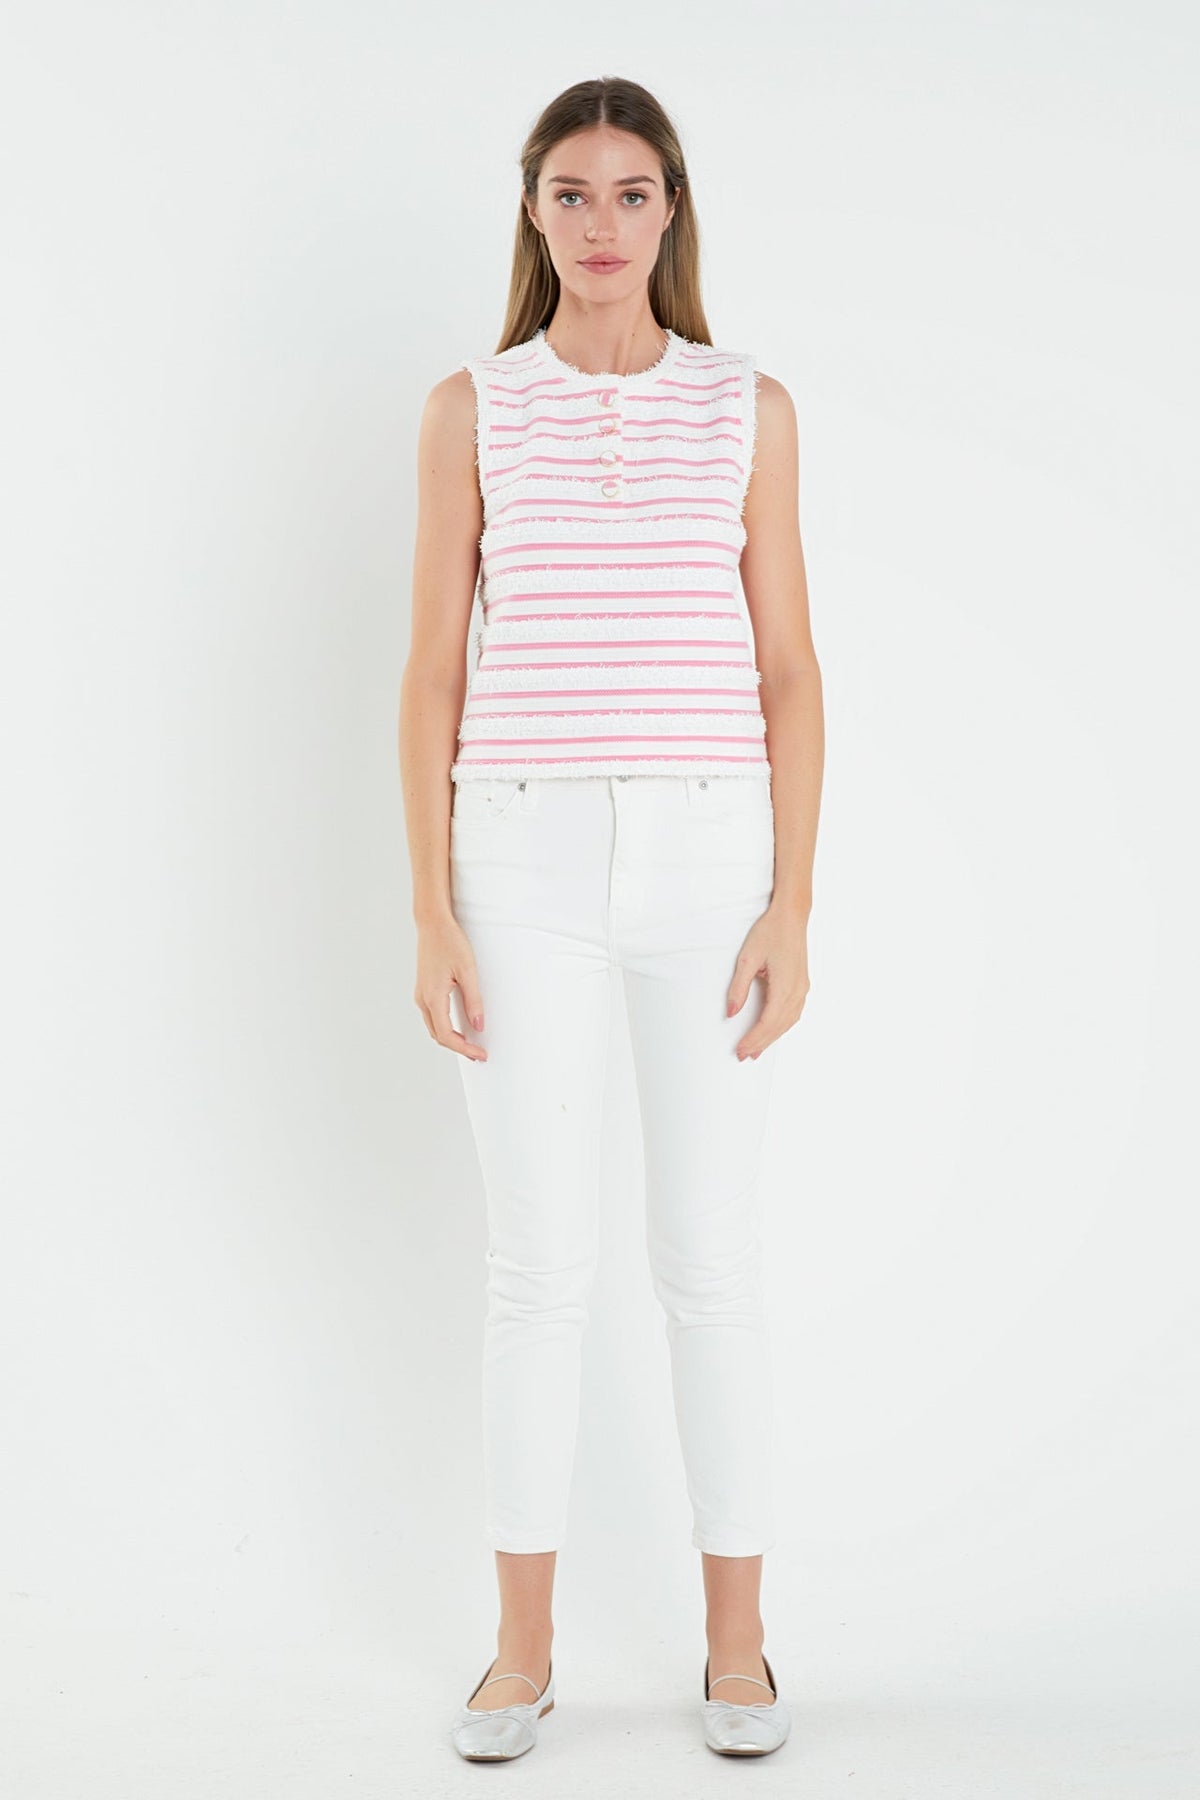 ENGLISH FACTORY - Fringed Striped Sleevless Top - TOPS available at Objectrare